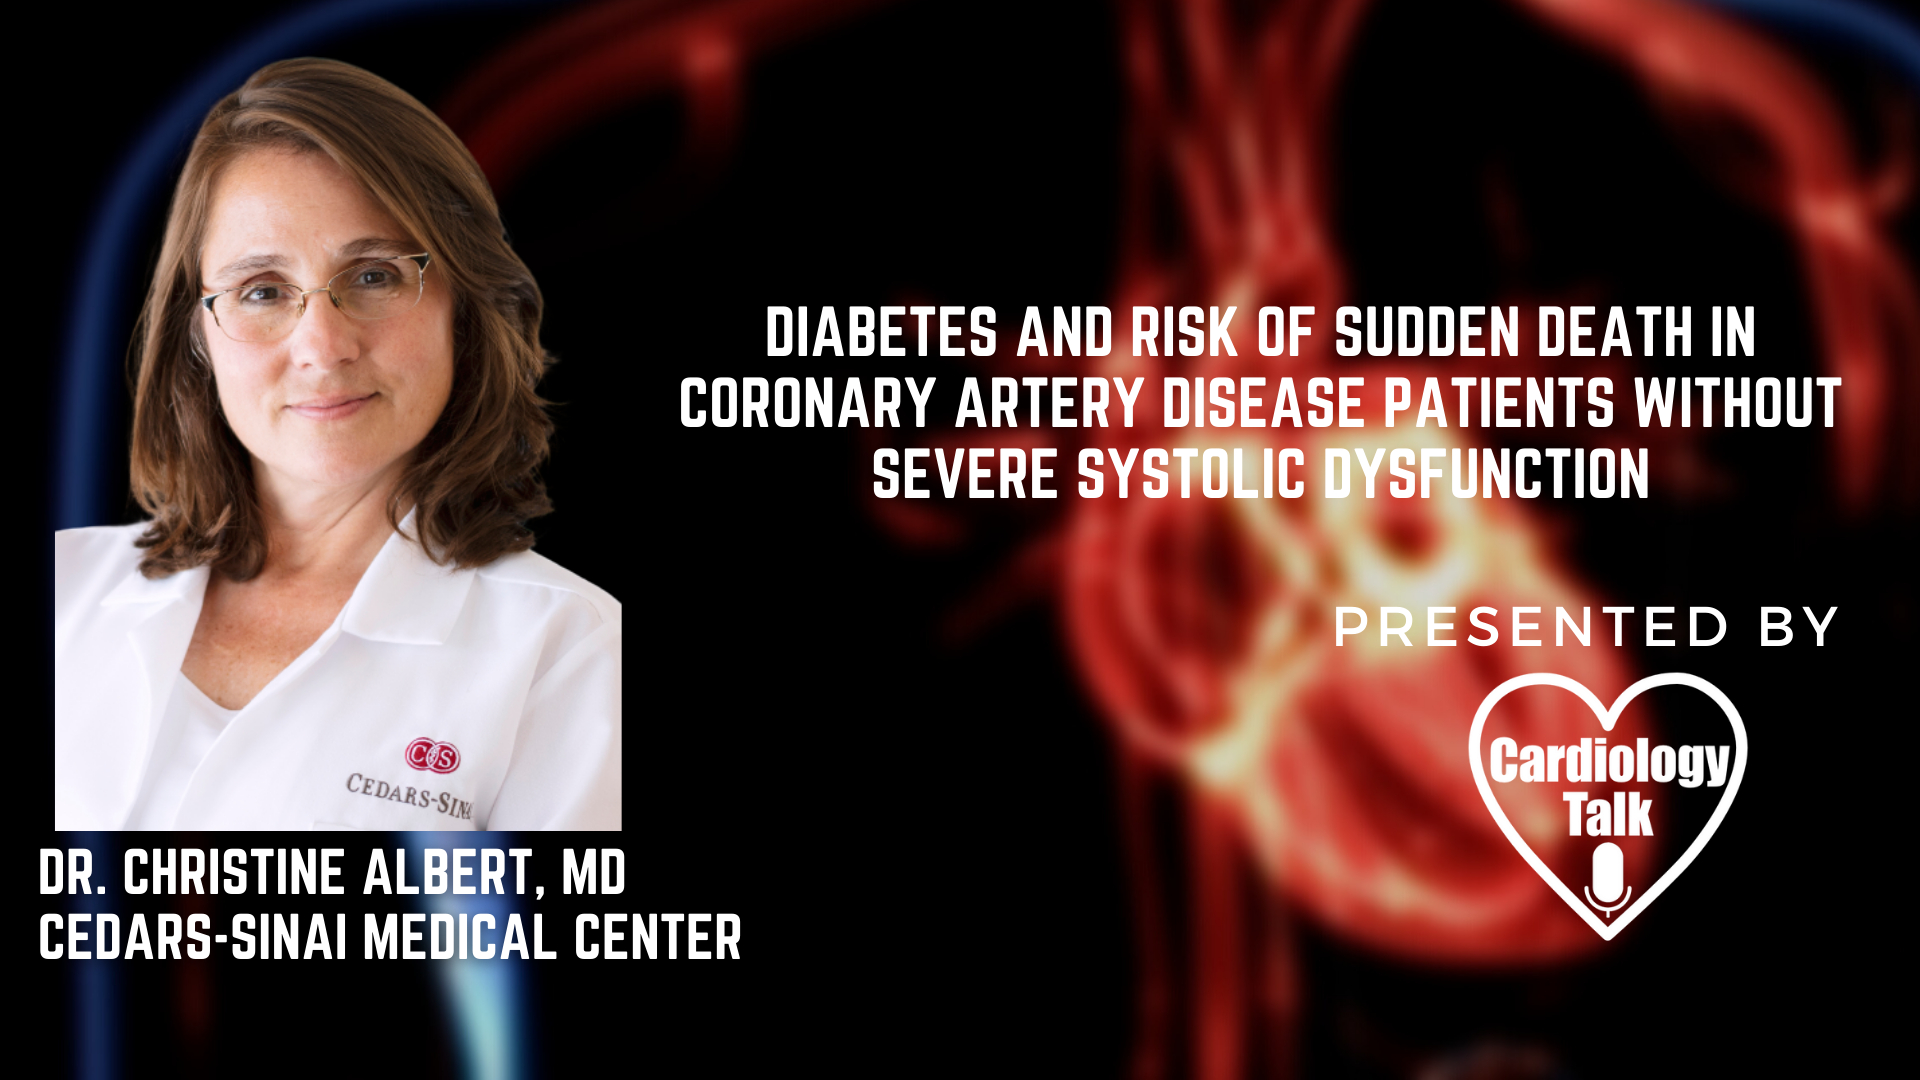 Dr. Christine Albert, MD - Diabetes and Risk of Sudden Death in Coronary Artery Disease Patients Without Severe Systolic Dysfunction @CMAlbertEP   @CedarsSinaiMed  #CoronaryArteryDisease ...